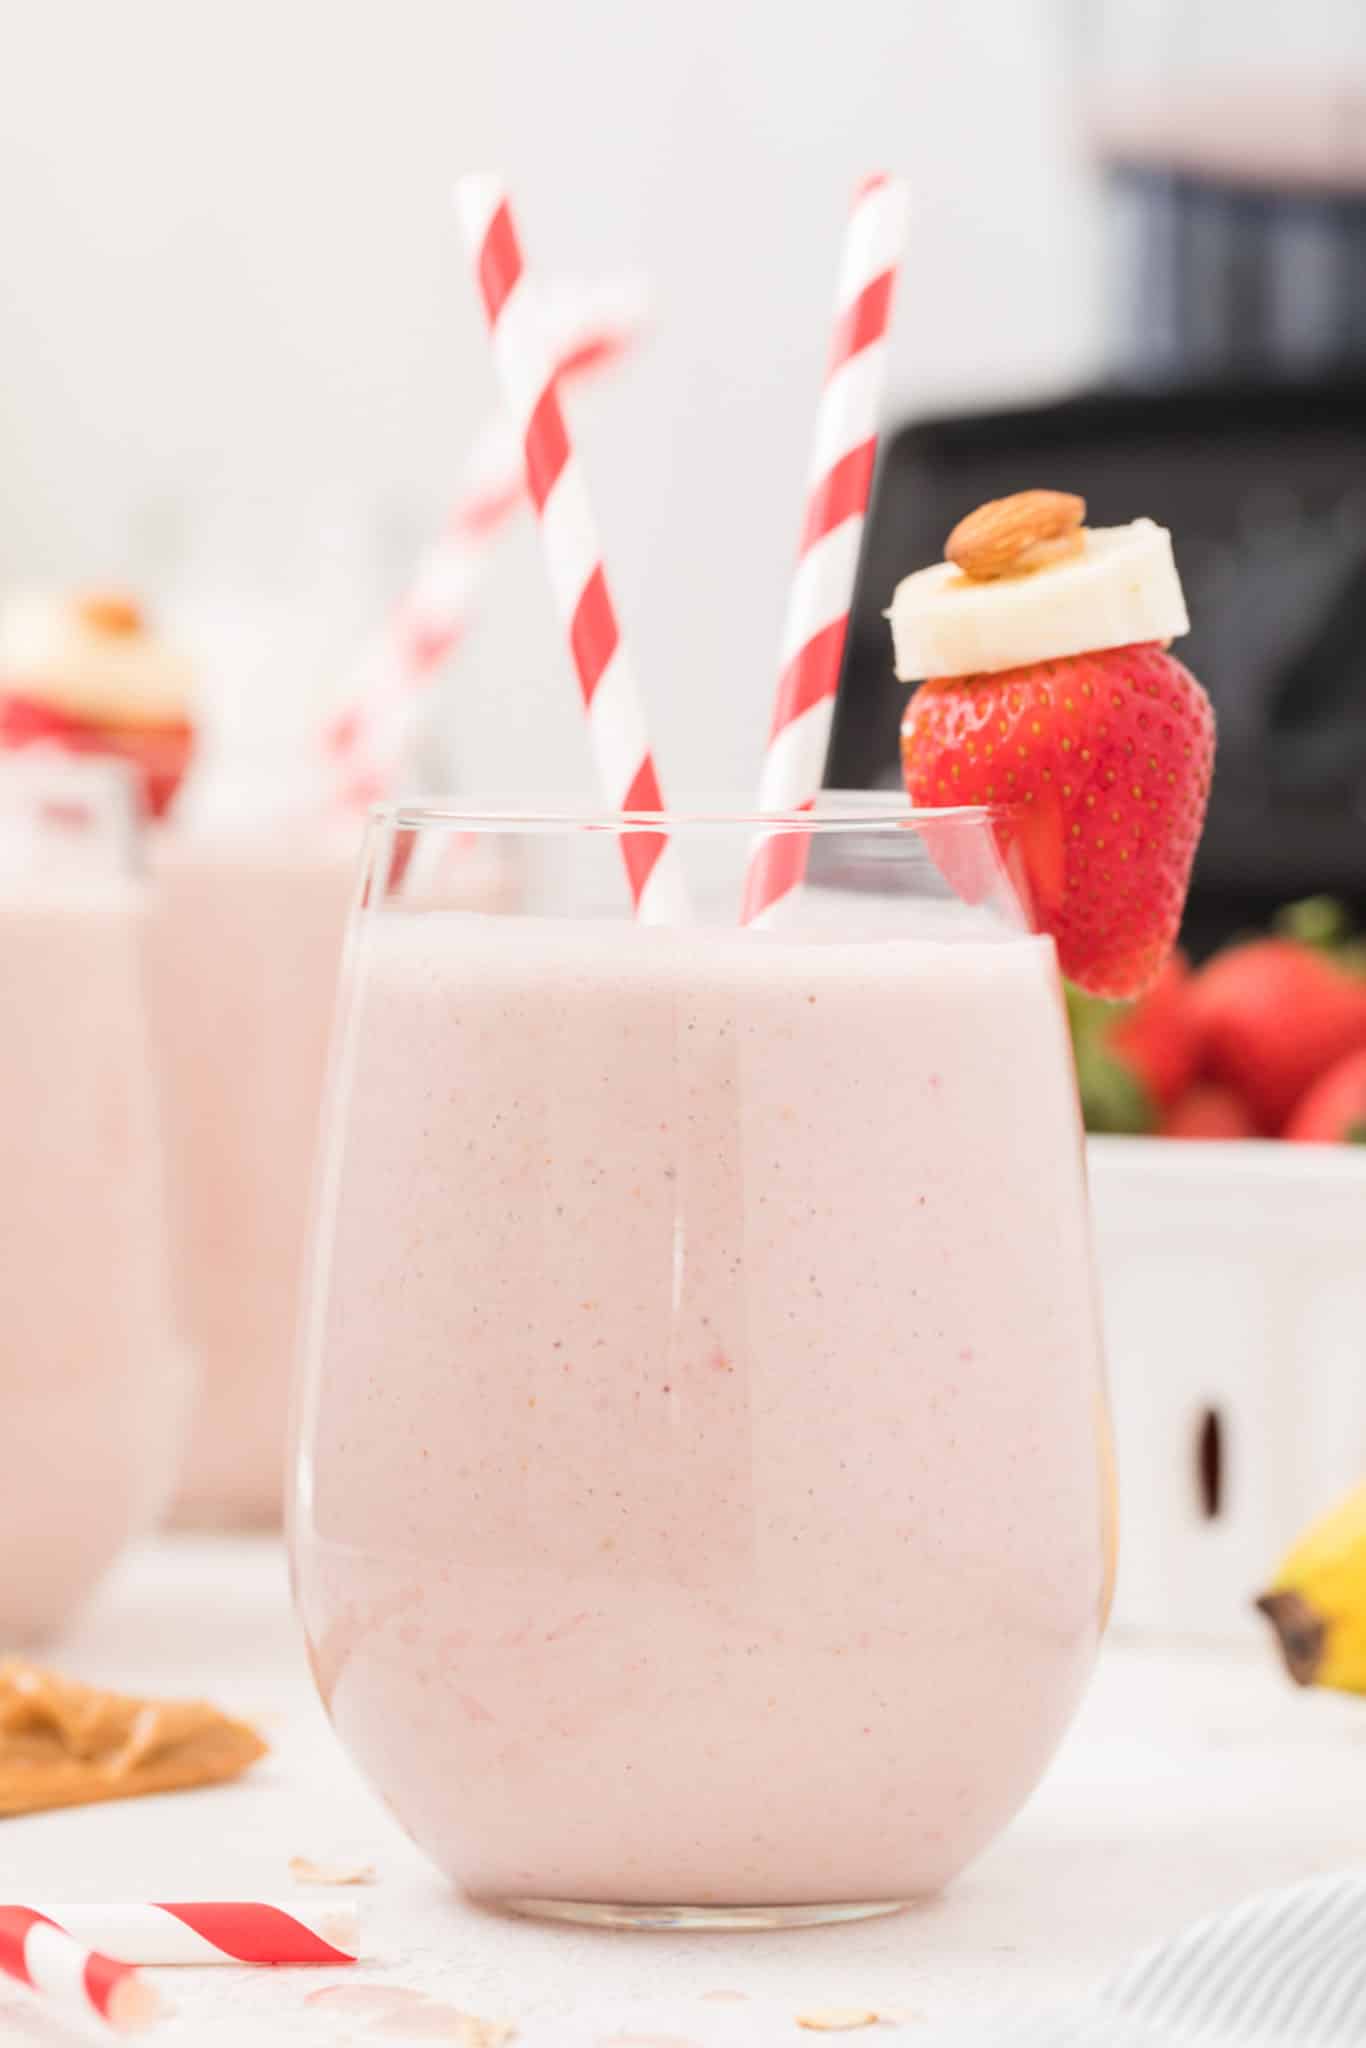 strawberry banana oatmeal smoothie served in a glass on a table